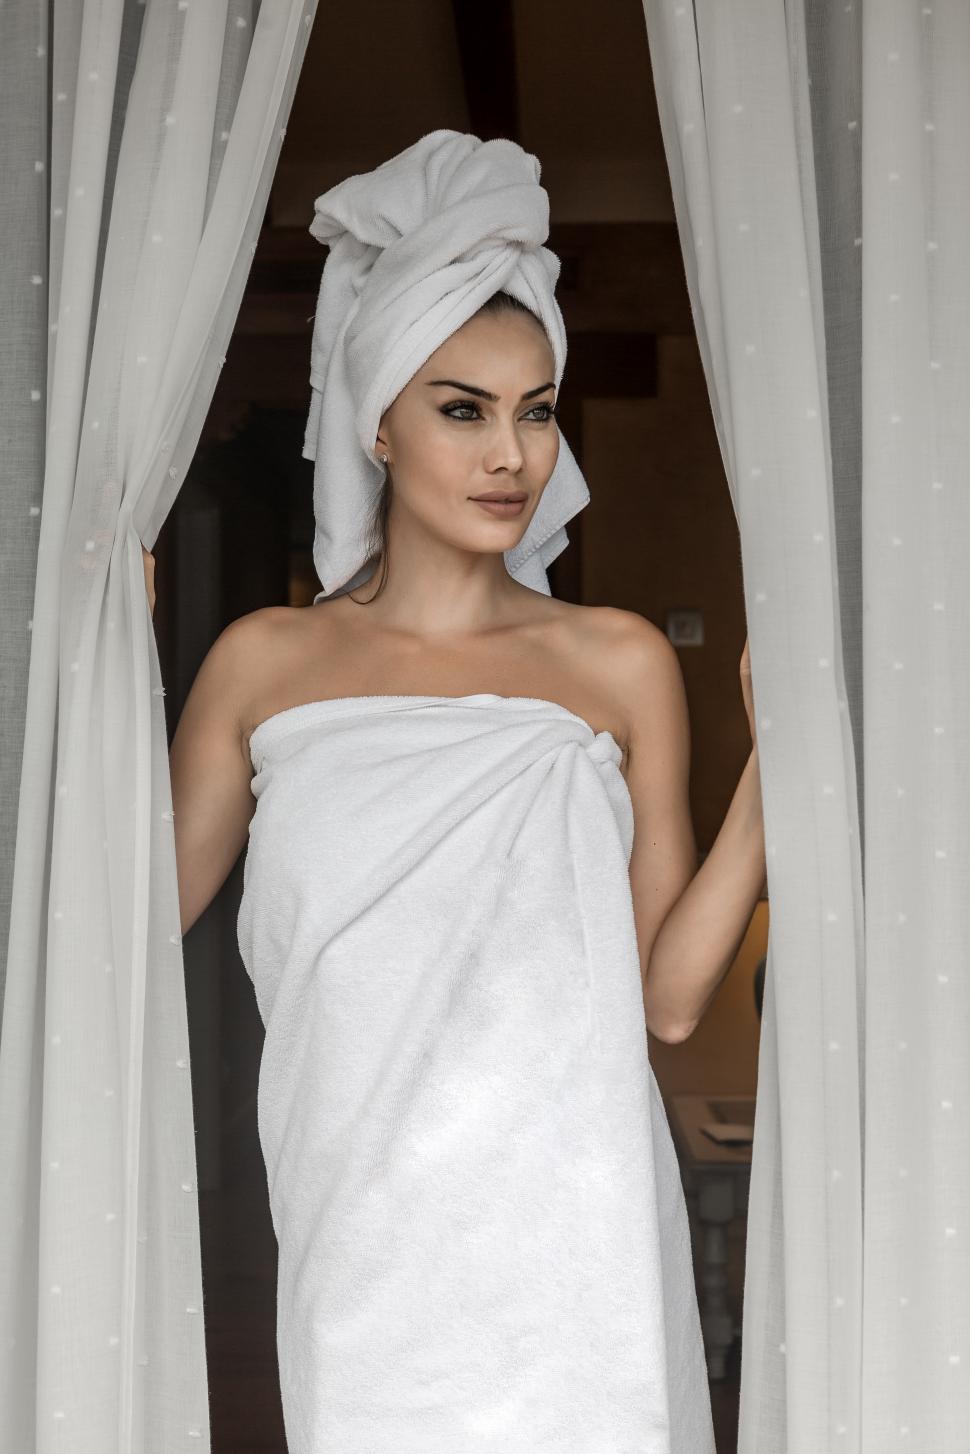 Download Free Stock Photo of Beautiful lady wrapped in towels after shower 